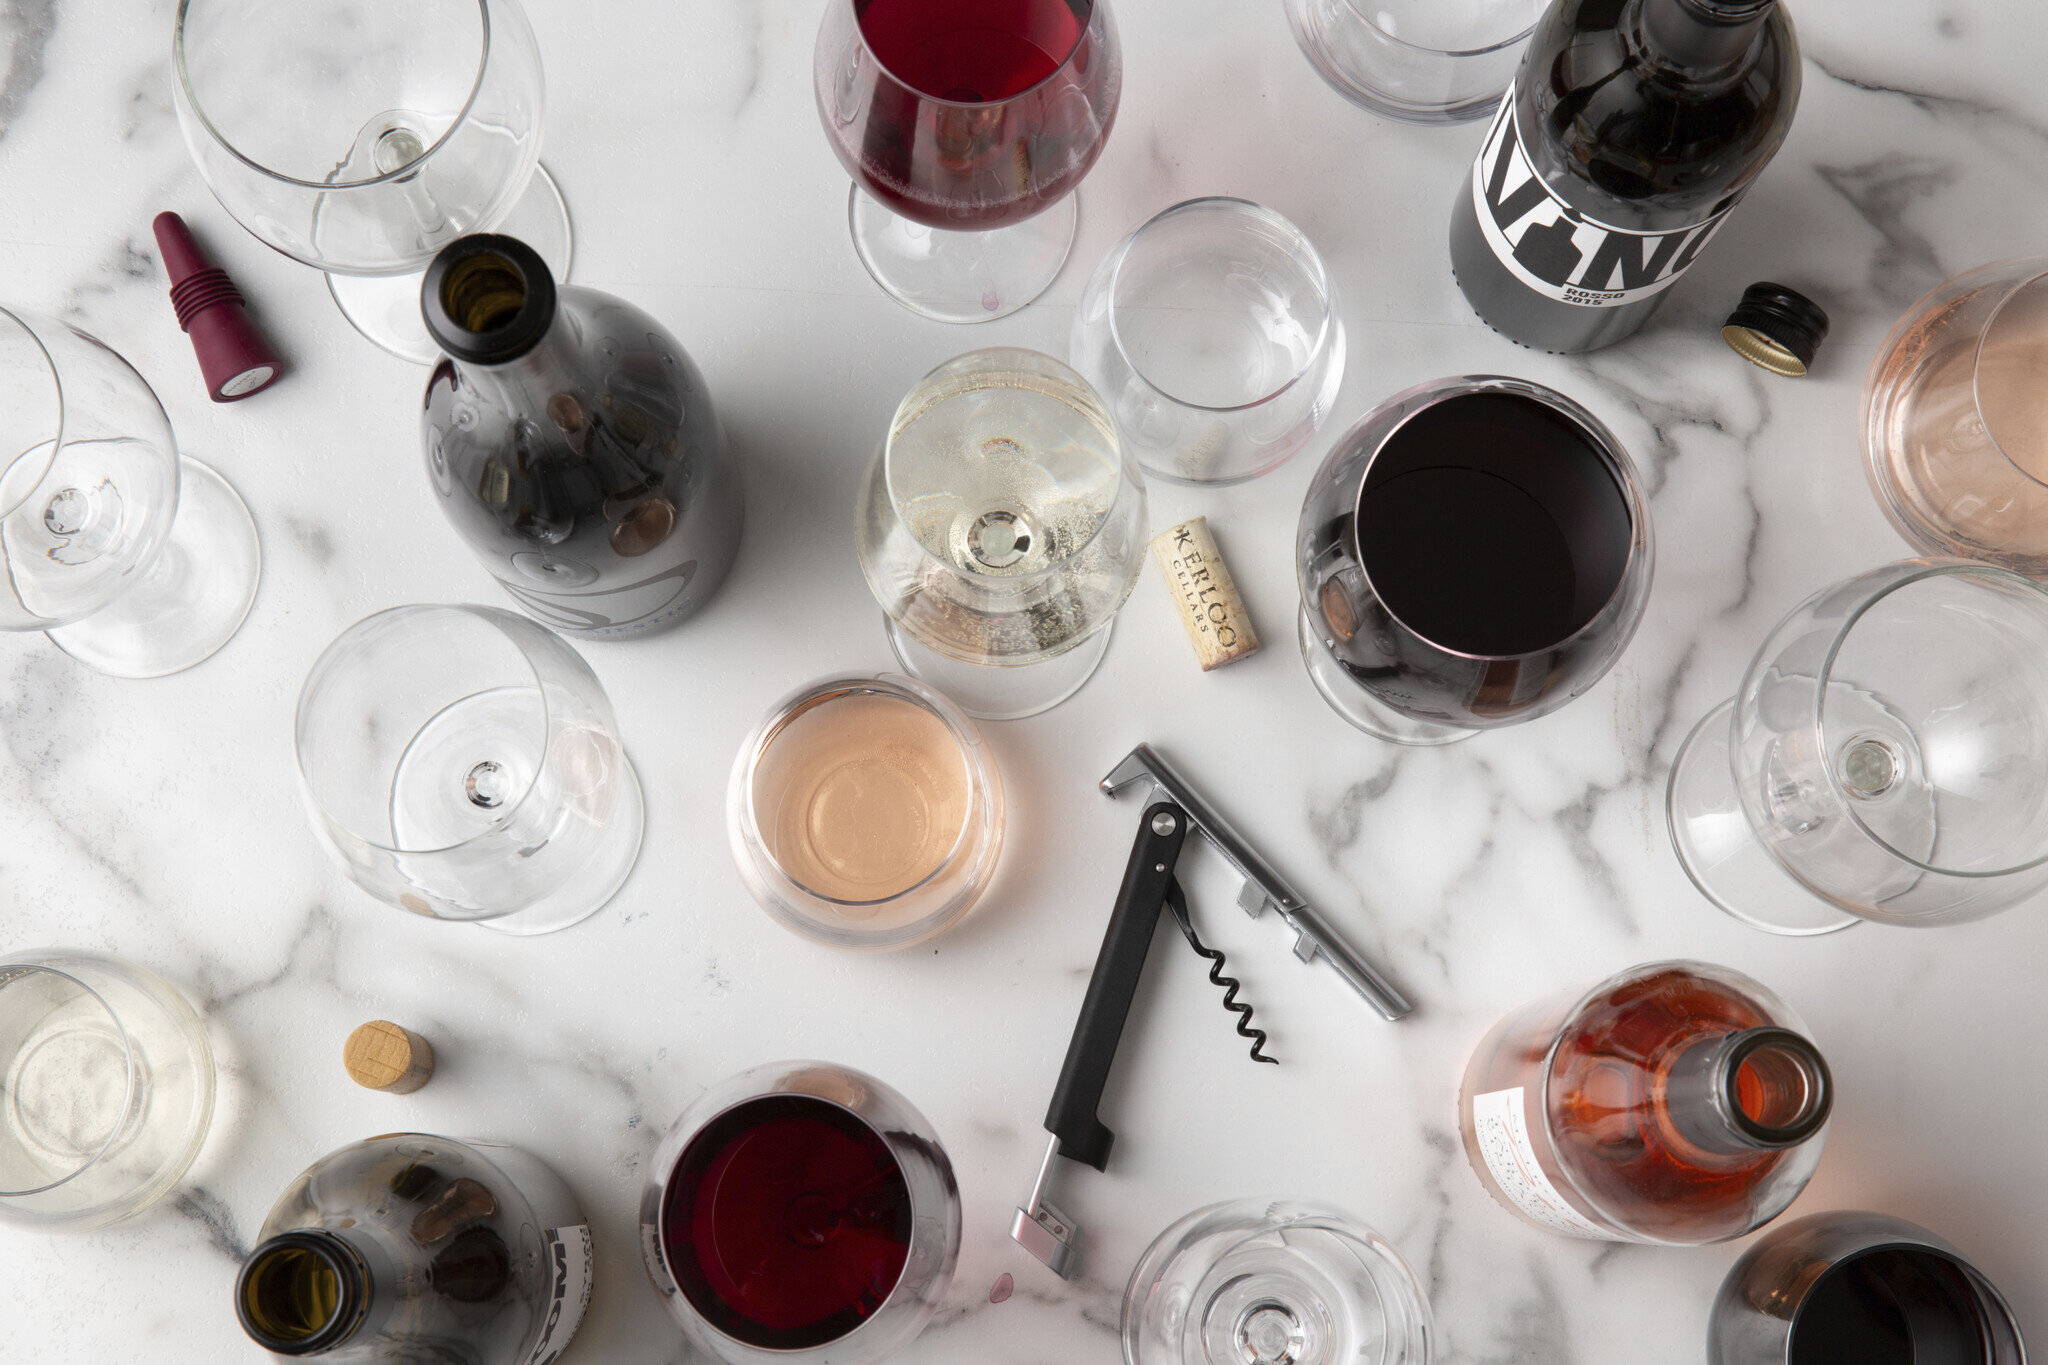 Wine glasses, bottles, and a corkscrew on the kitchen table.